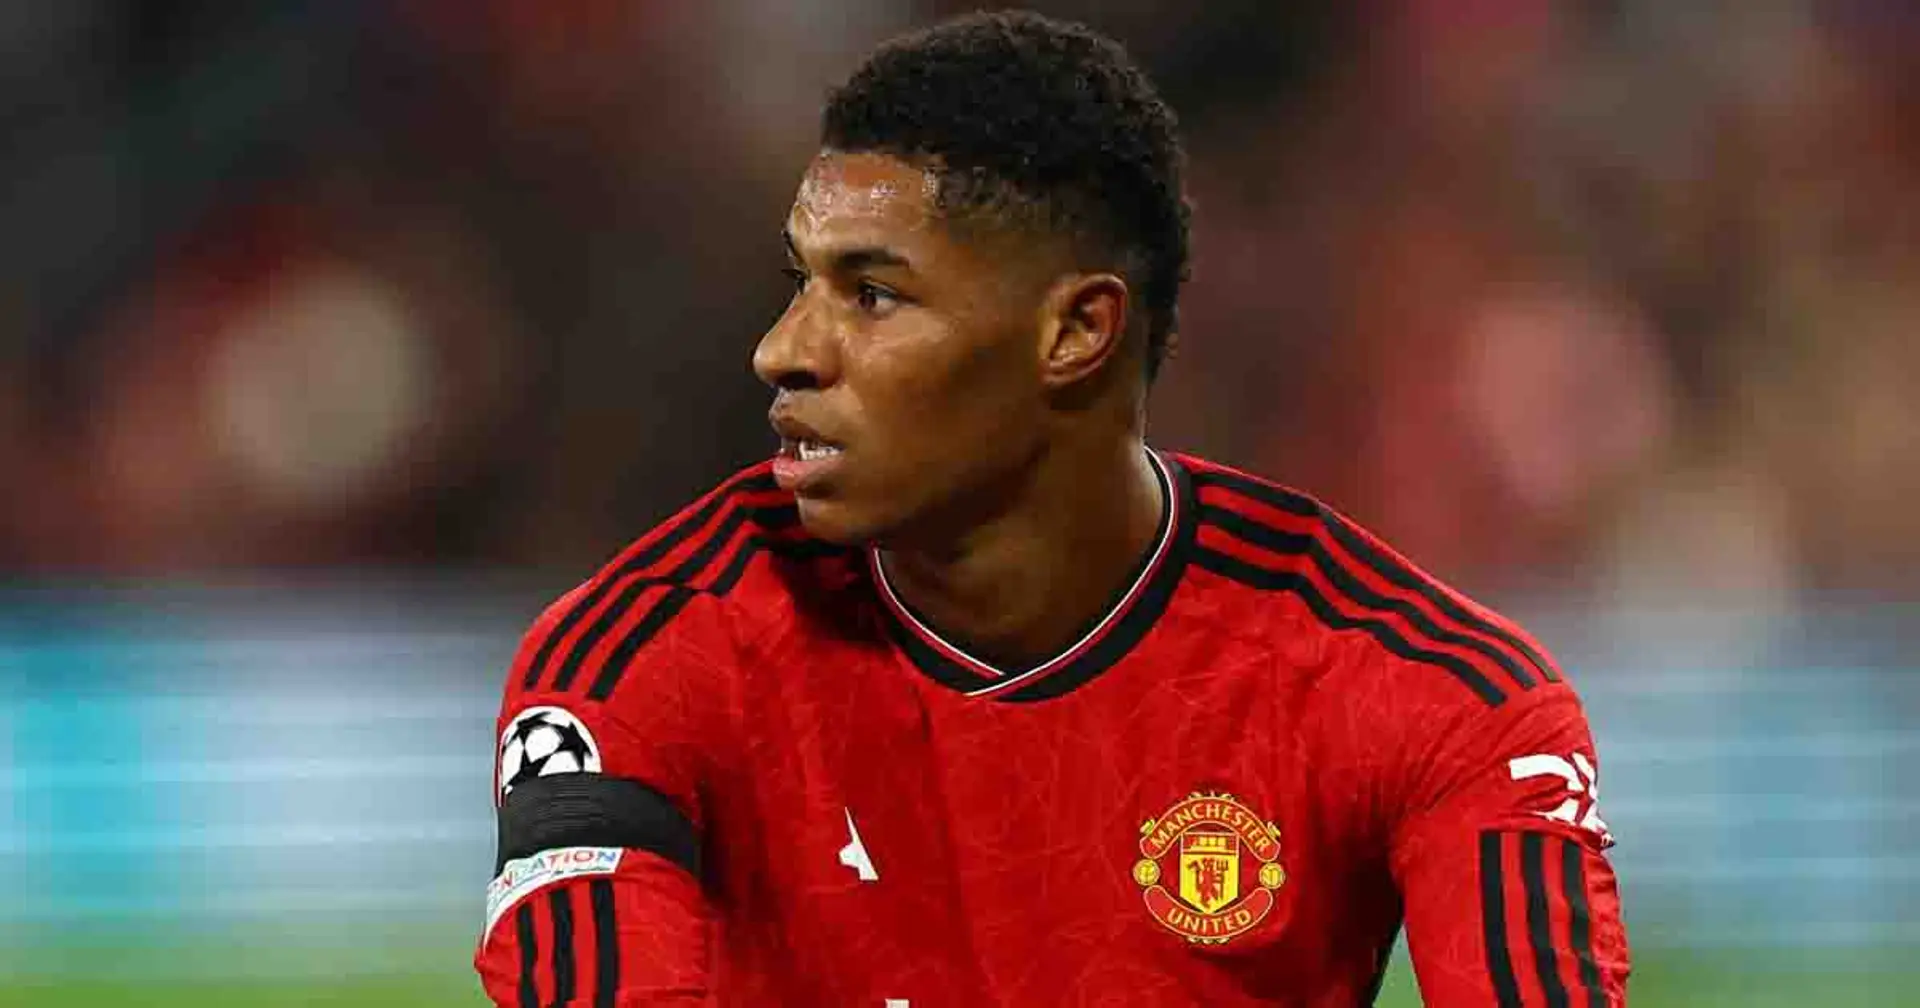 Marcus Rashford provides update on injury scare & 3 more big Man United stories you might've missed